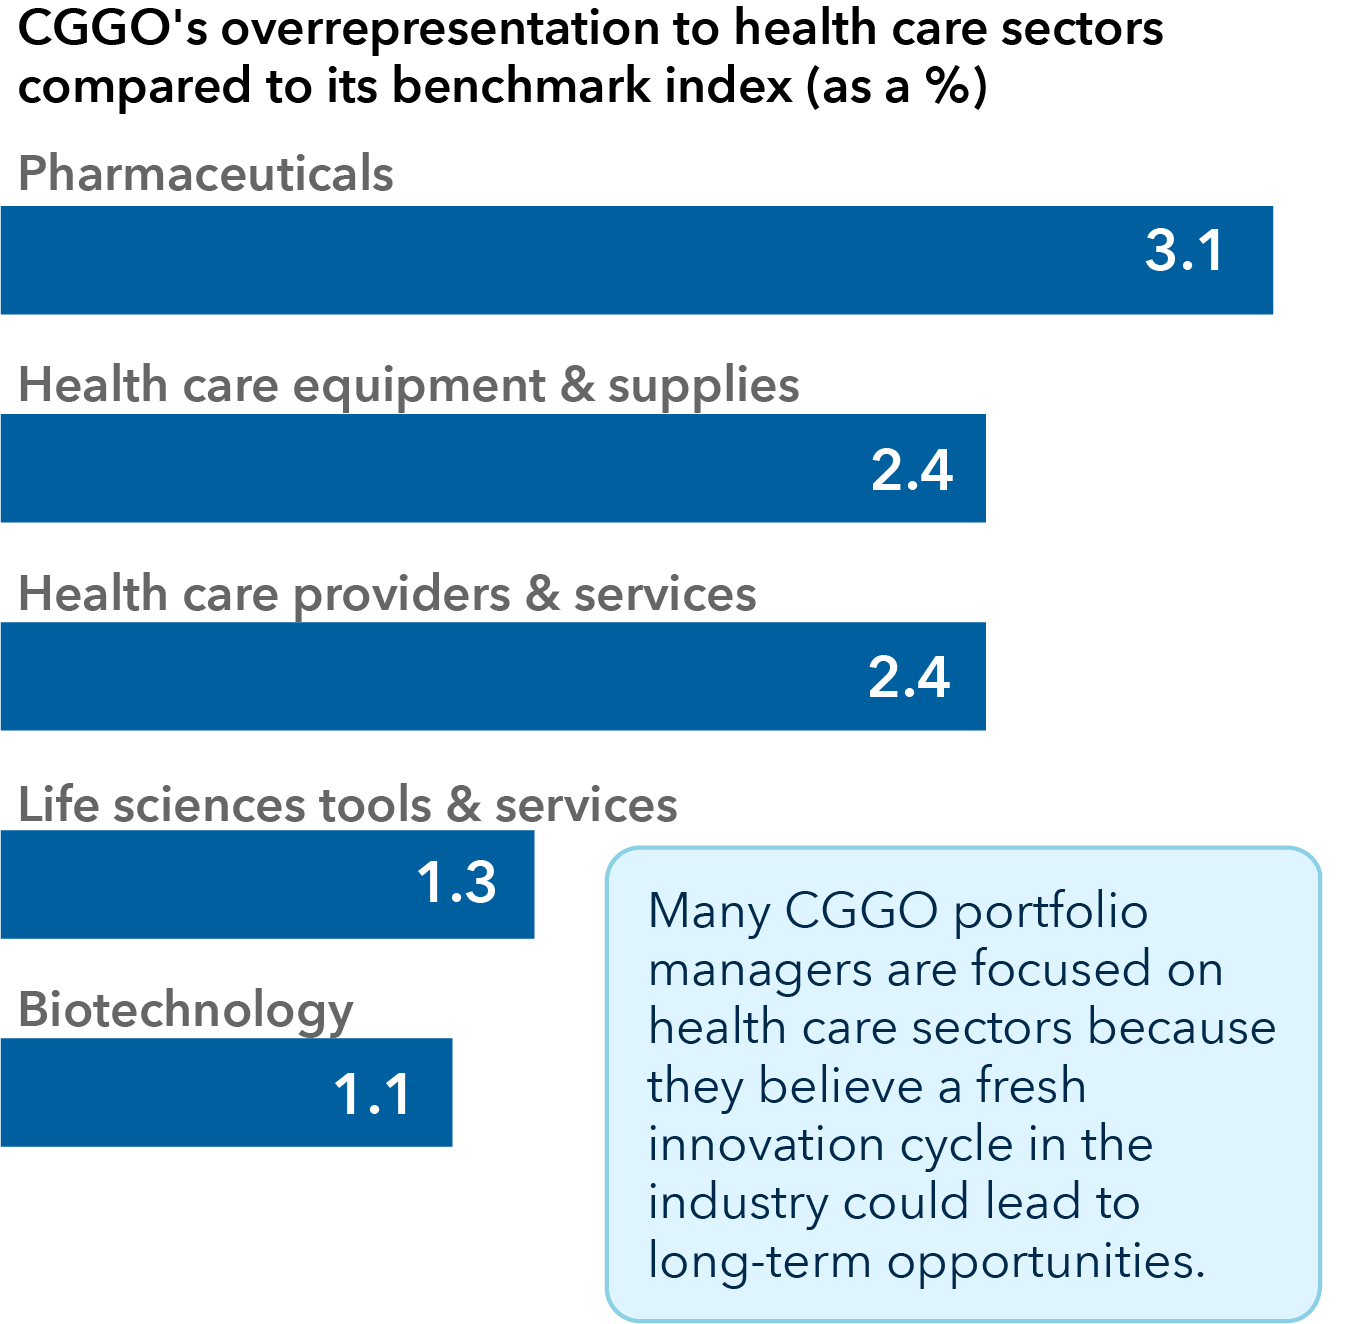 There’s a bar chart with five navy blue horizontal bars and text above the chart that says, “CGGO’s overrepresentation to health care sectors compared to its benchmark index (as a %).” The first bar says, “Pharmaceuticals: 3.1.” The second bar says, “Health care equipment & supplies: 2.4.” The third bar says, “Health care providers and services: 2.4.” The fourth bar says, “Life sciences tools and services: 1.3.” The fifth bar says, “Biotechnology: 1.1. There’s text within the chart that says: ”Many CGGO portfolio managers are focused on health care sectors because they believe a fresh innovation cycle in the industry could lead to long-term opportunities.” 